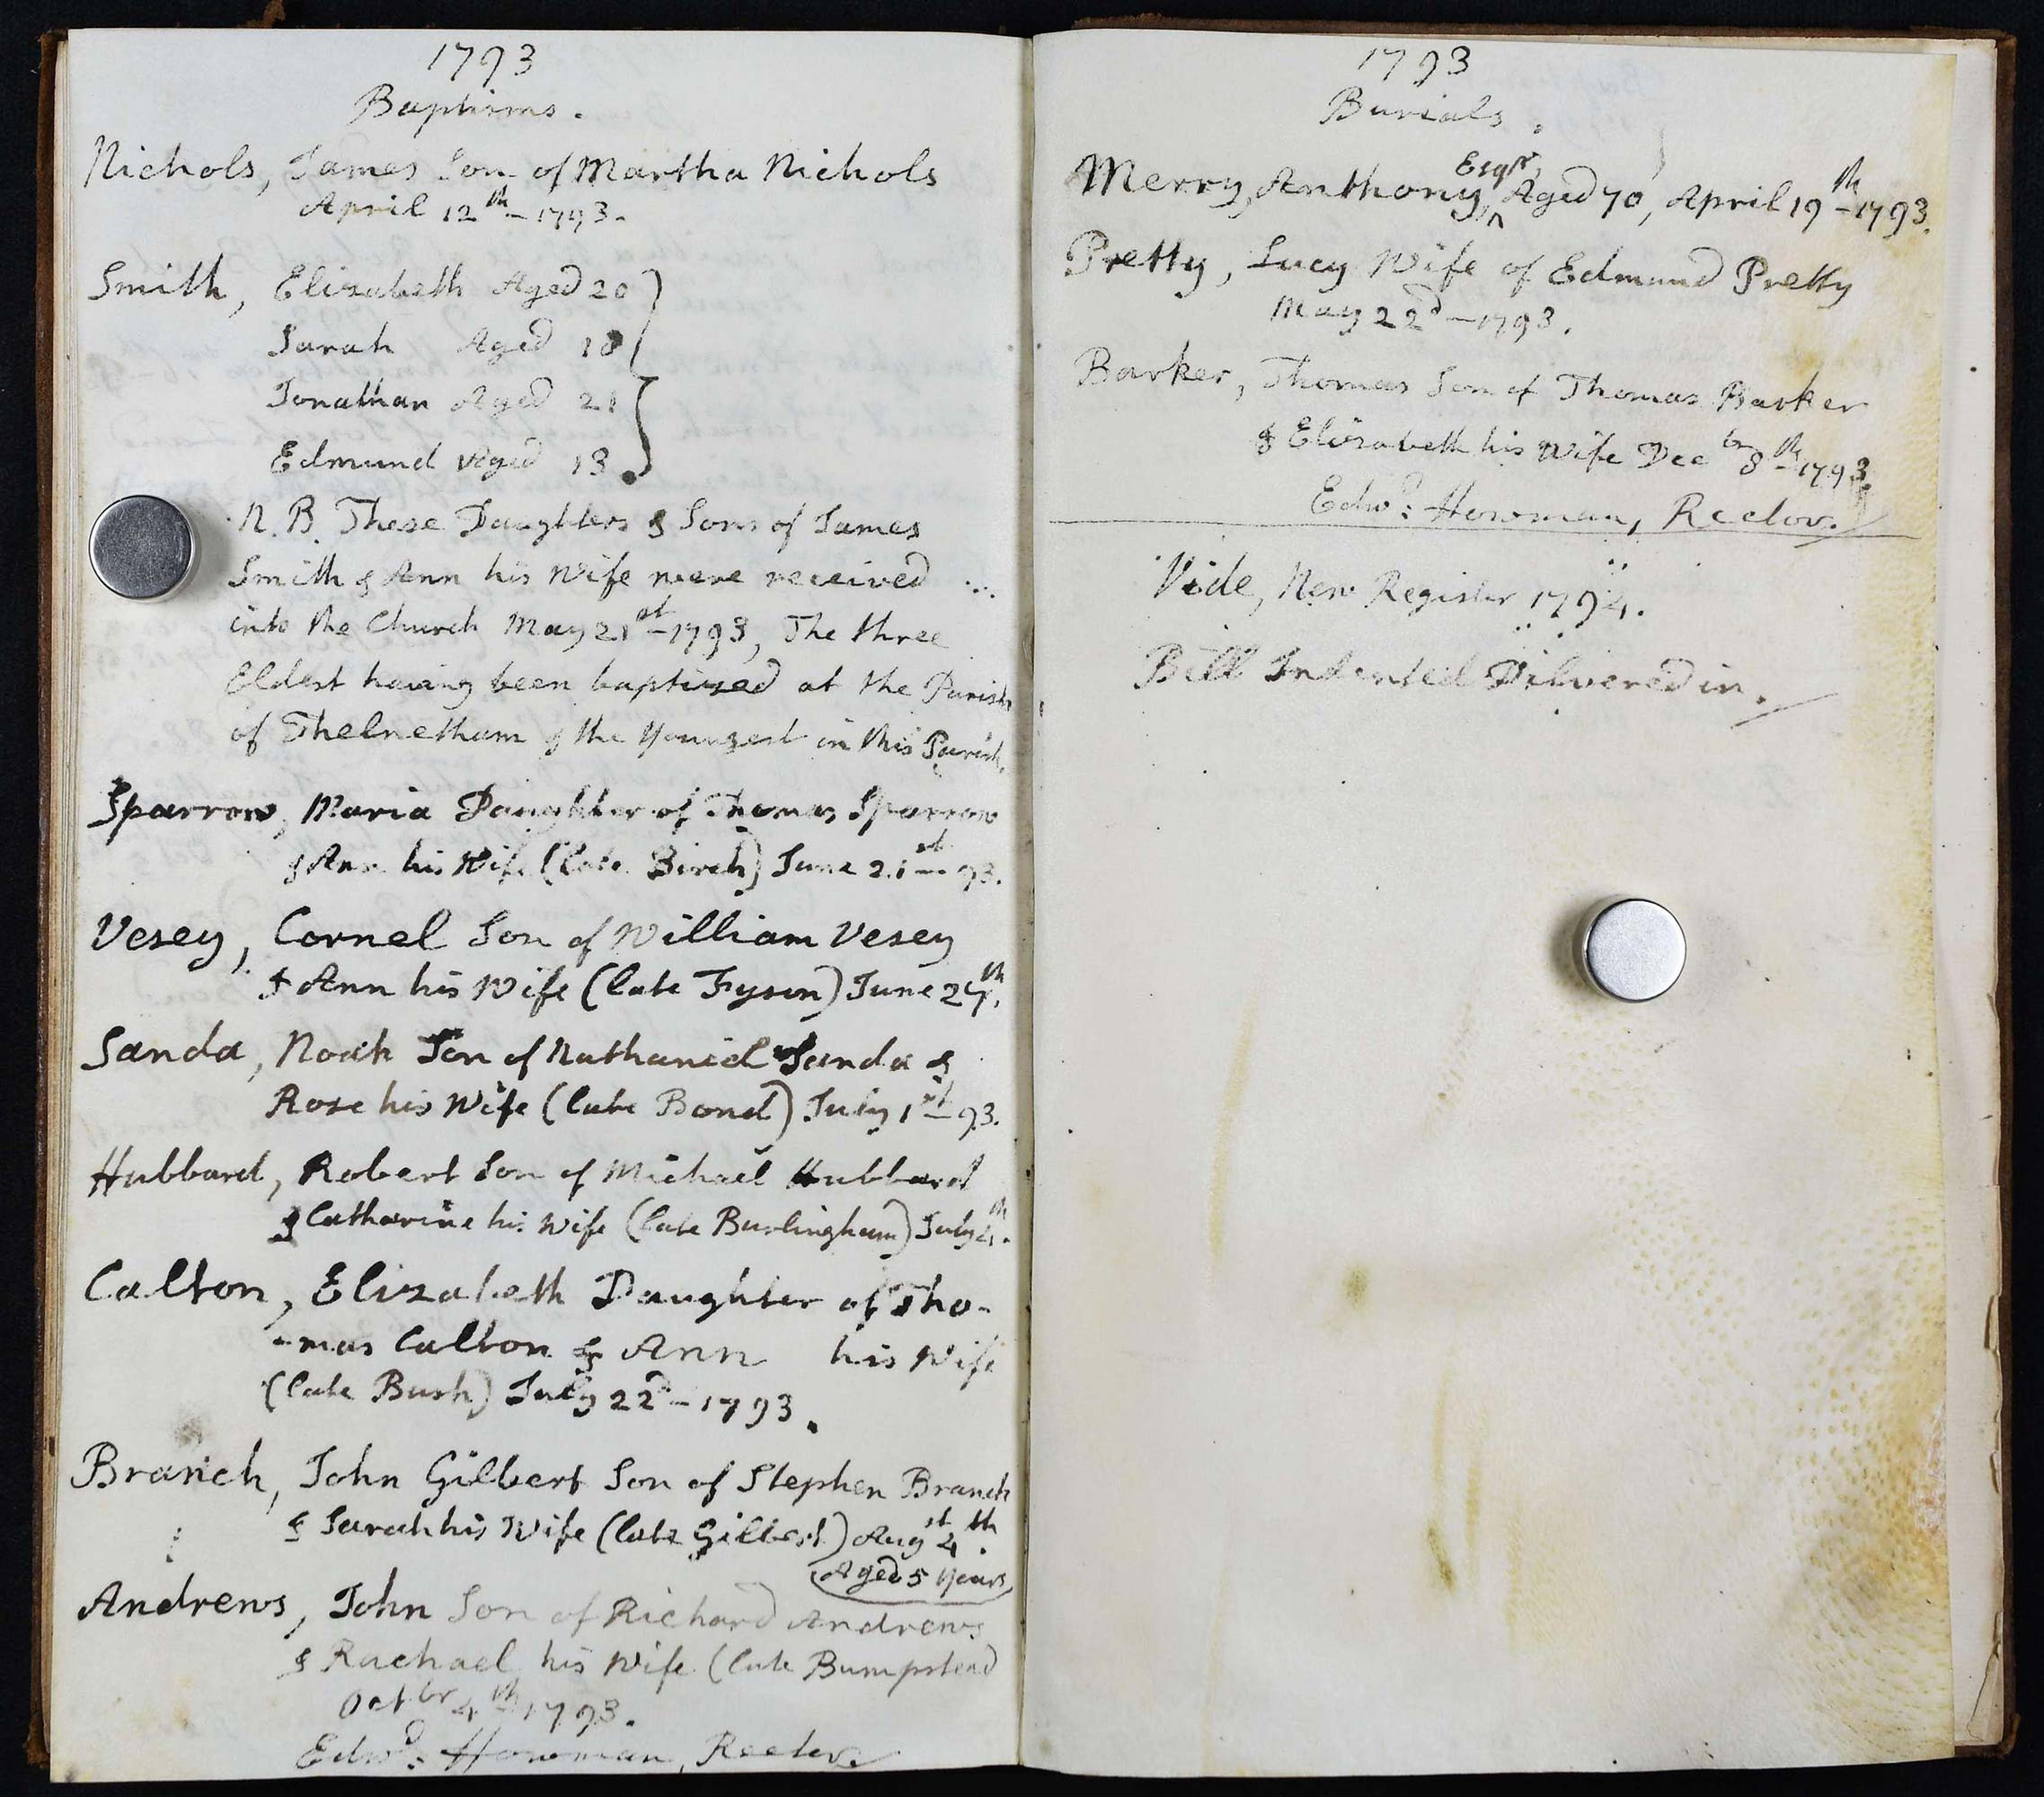 A page of Norfolk baptism records from 1793